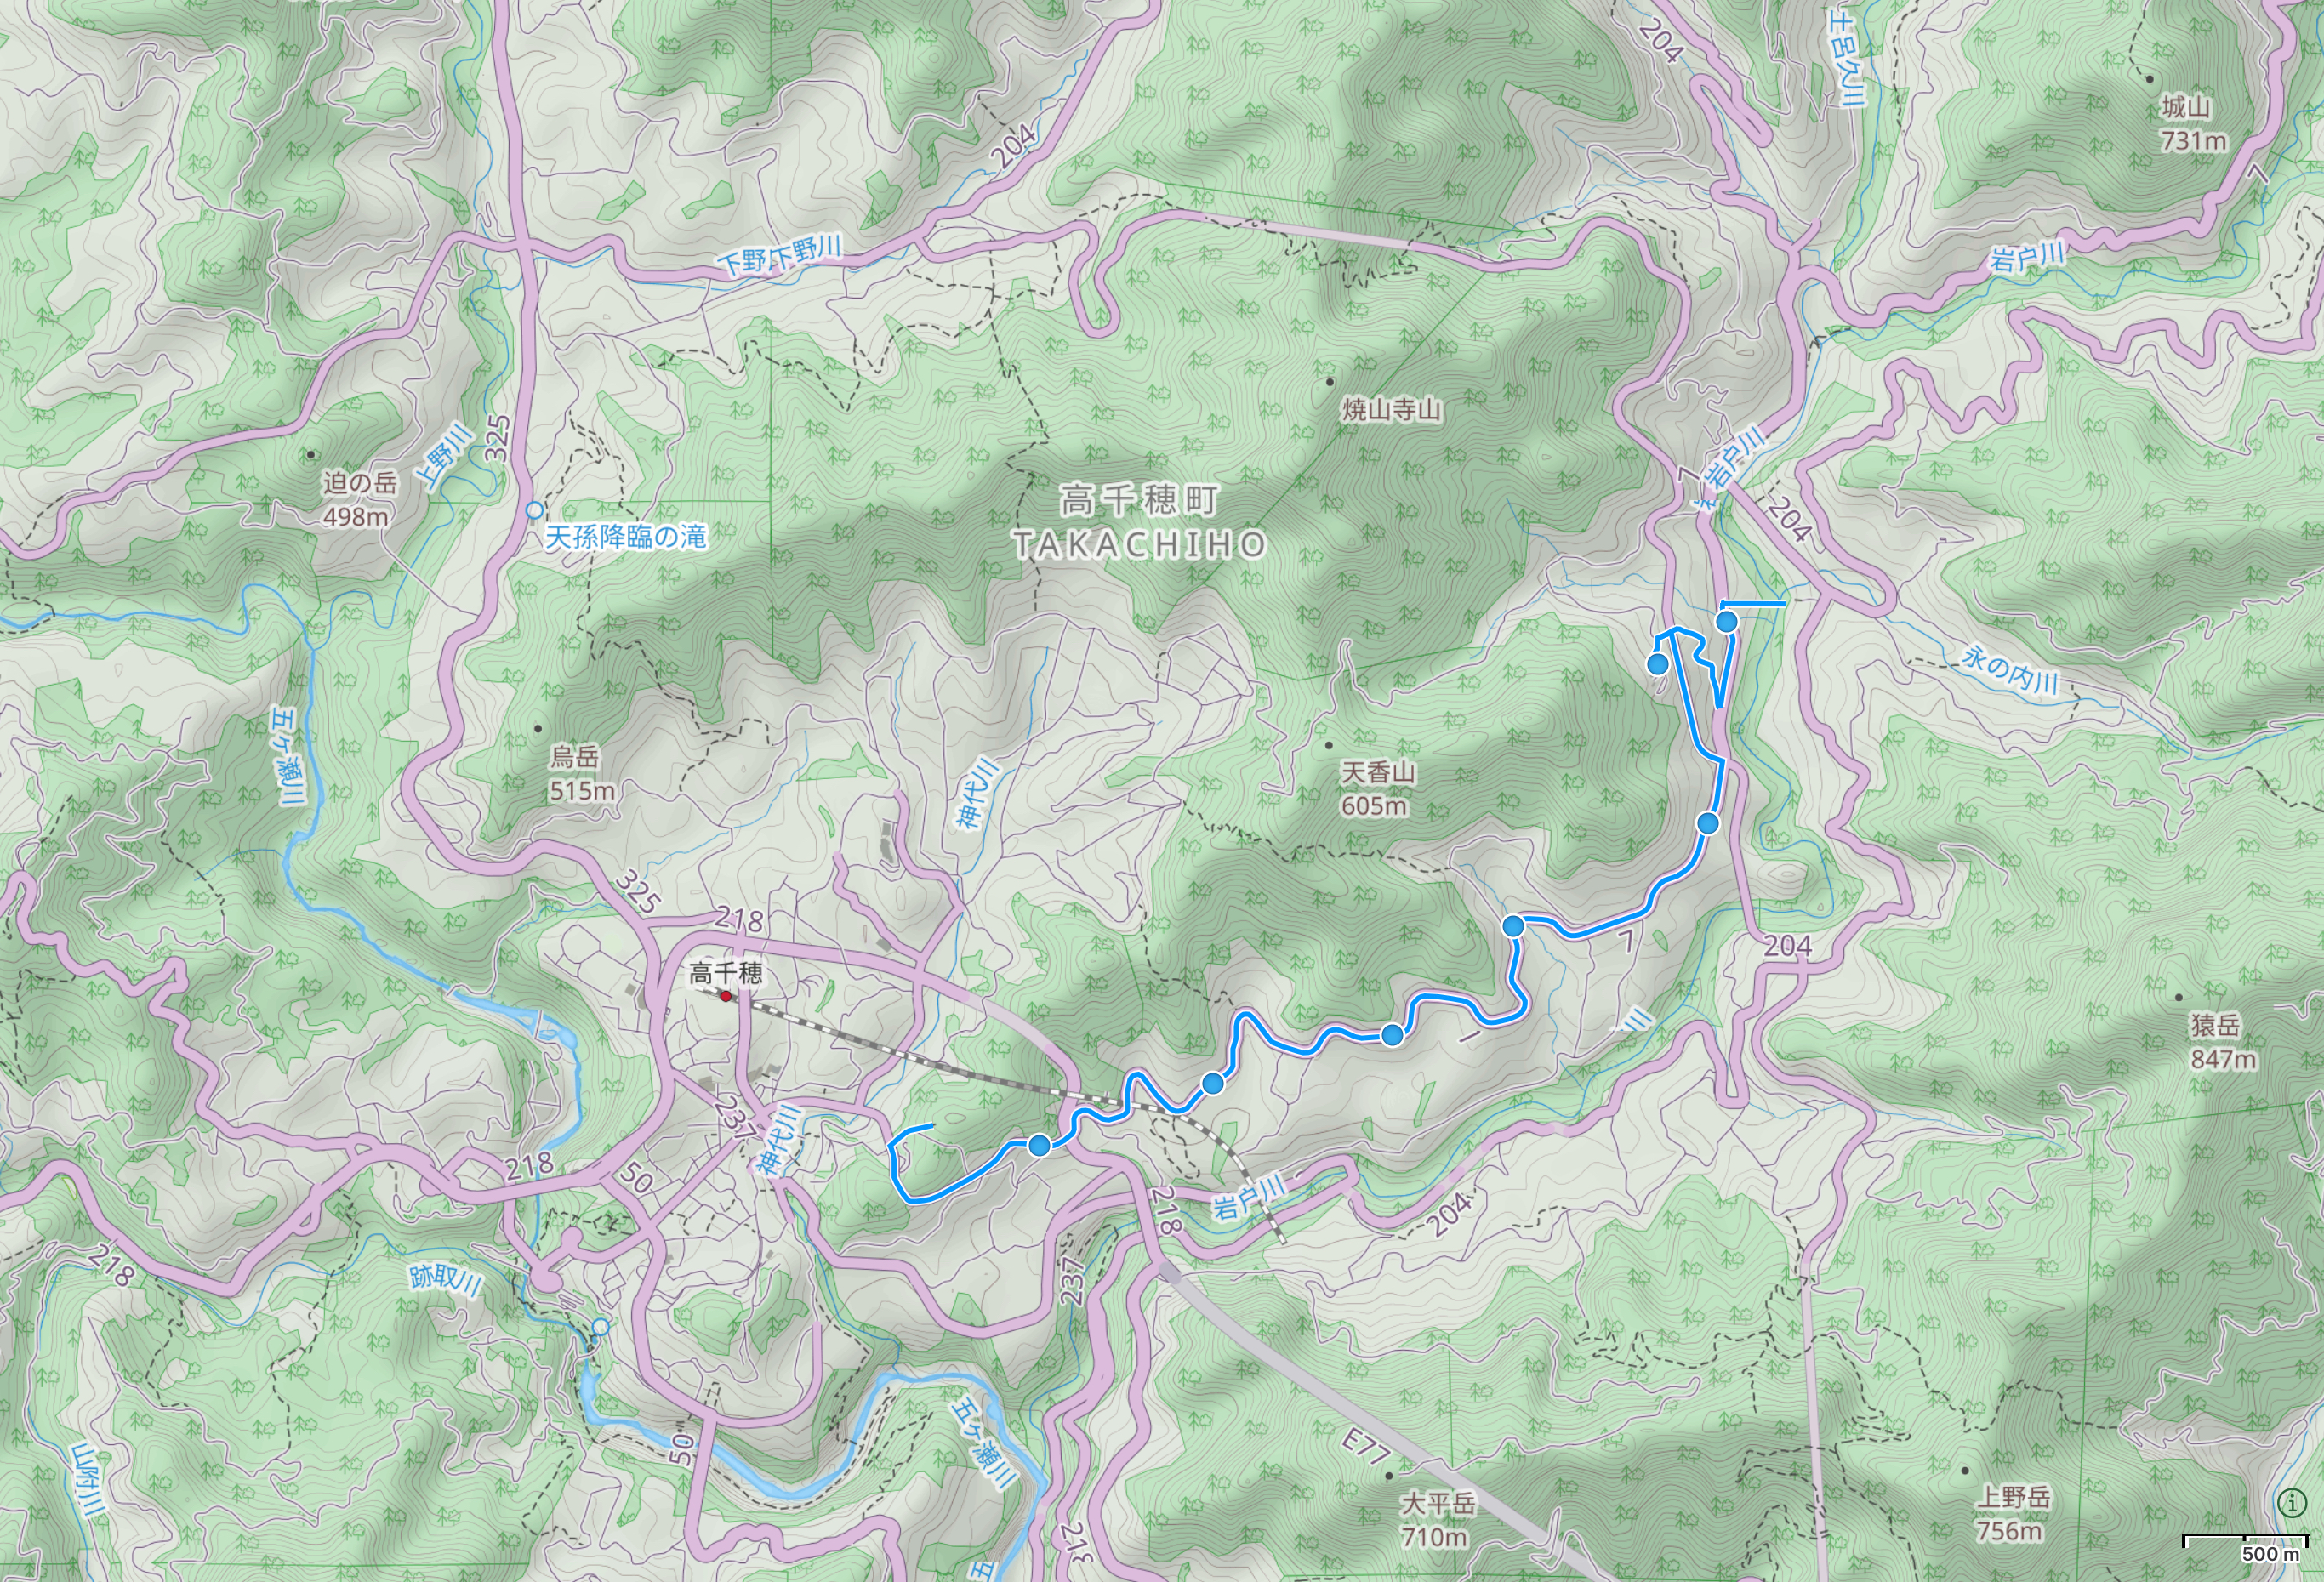 Map of Miyazaki with author’s route in the Takachiho valley highlighted.